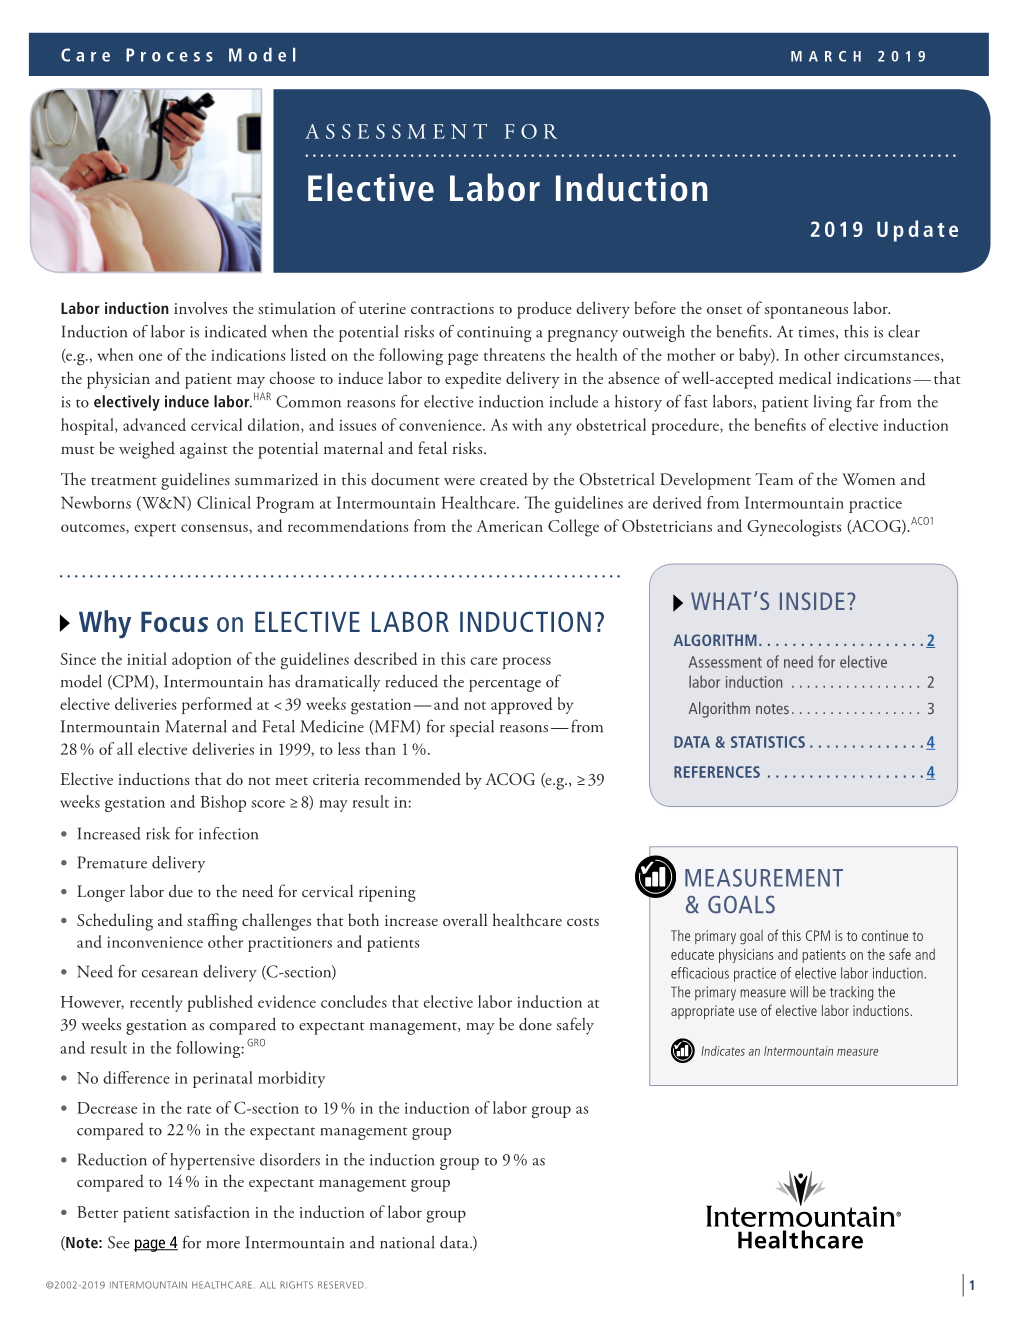 Elective Labor Induction 2019 Update